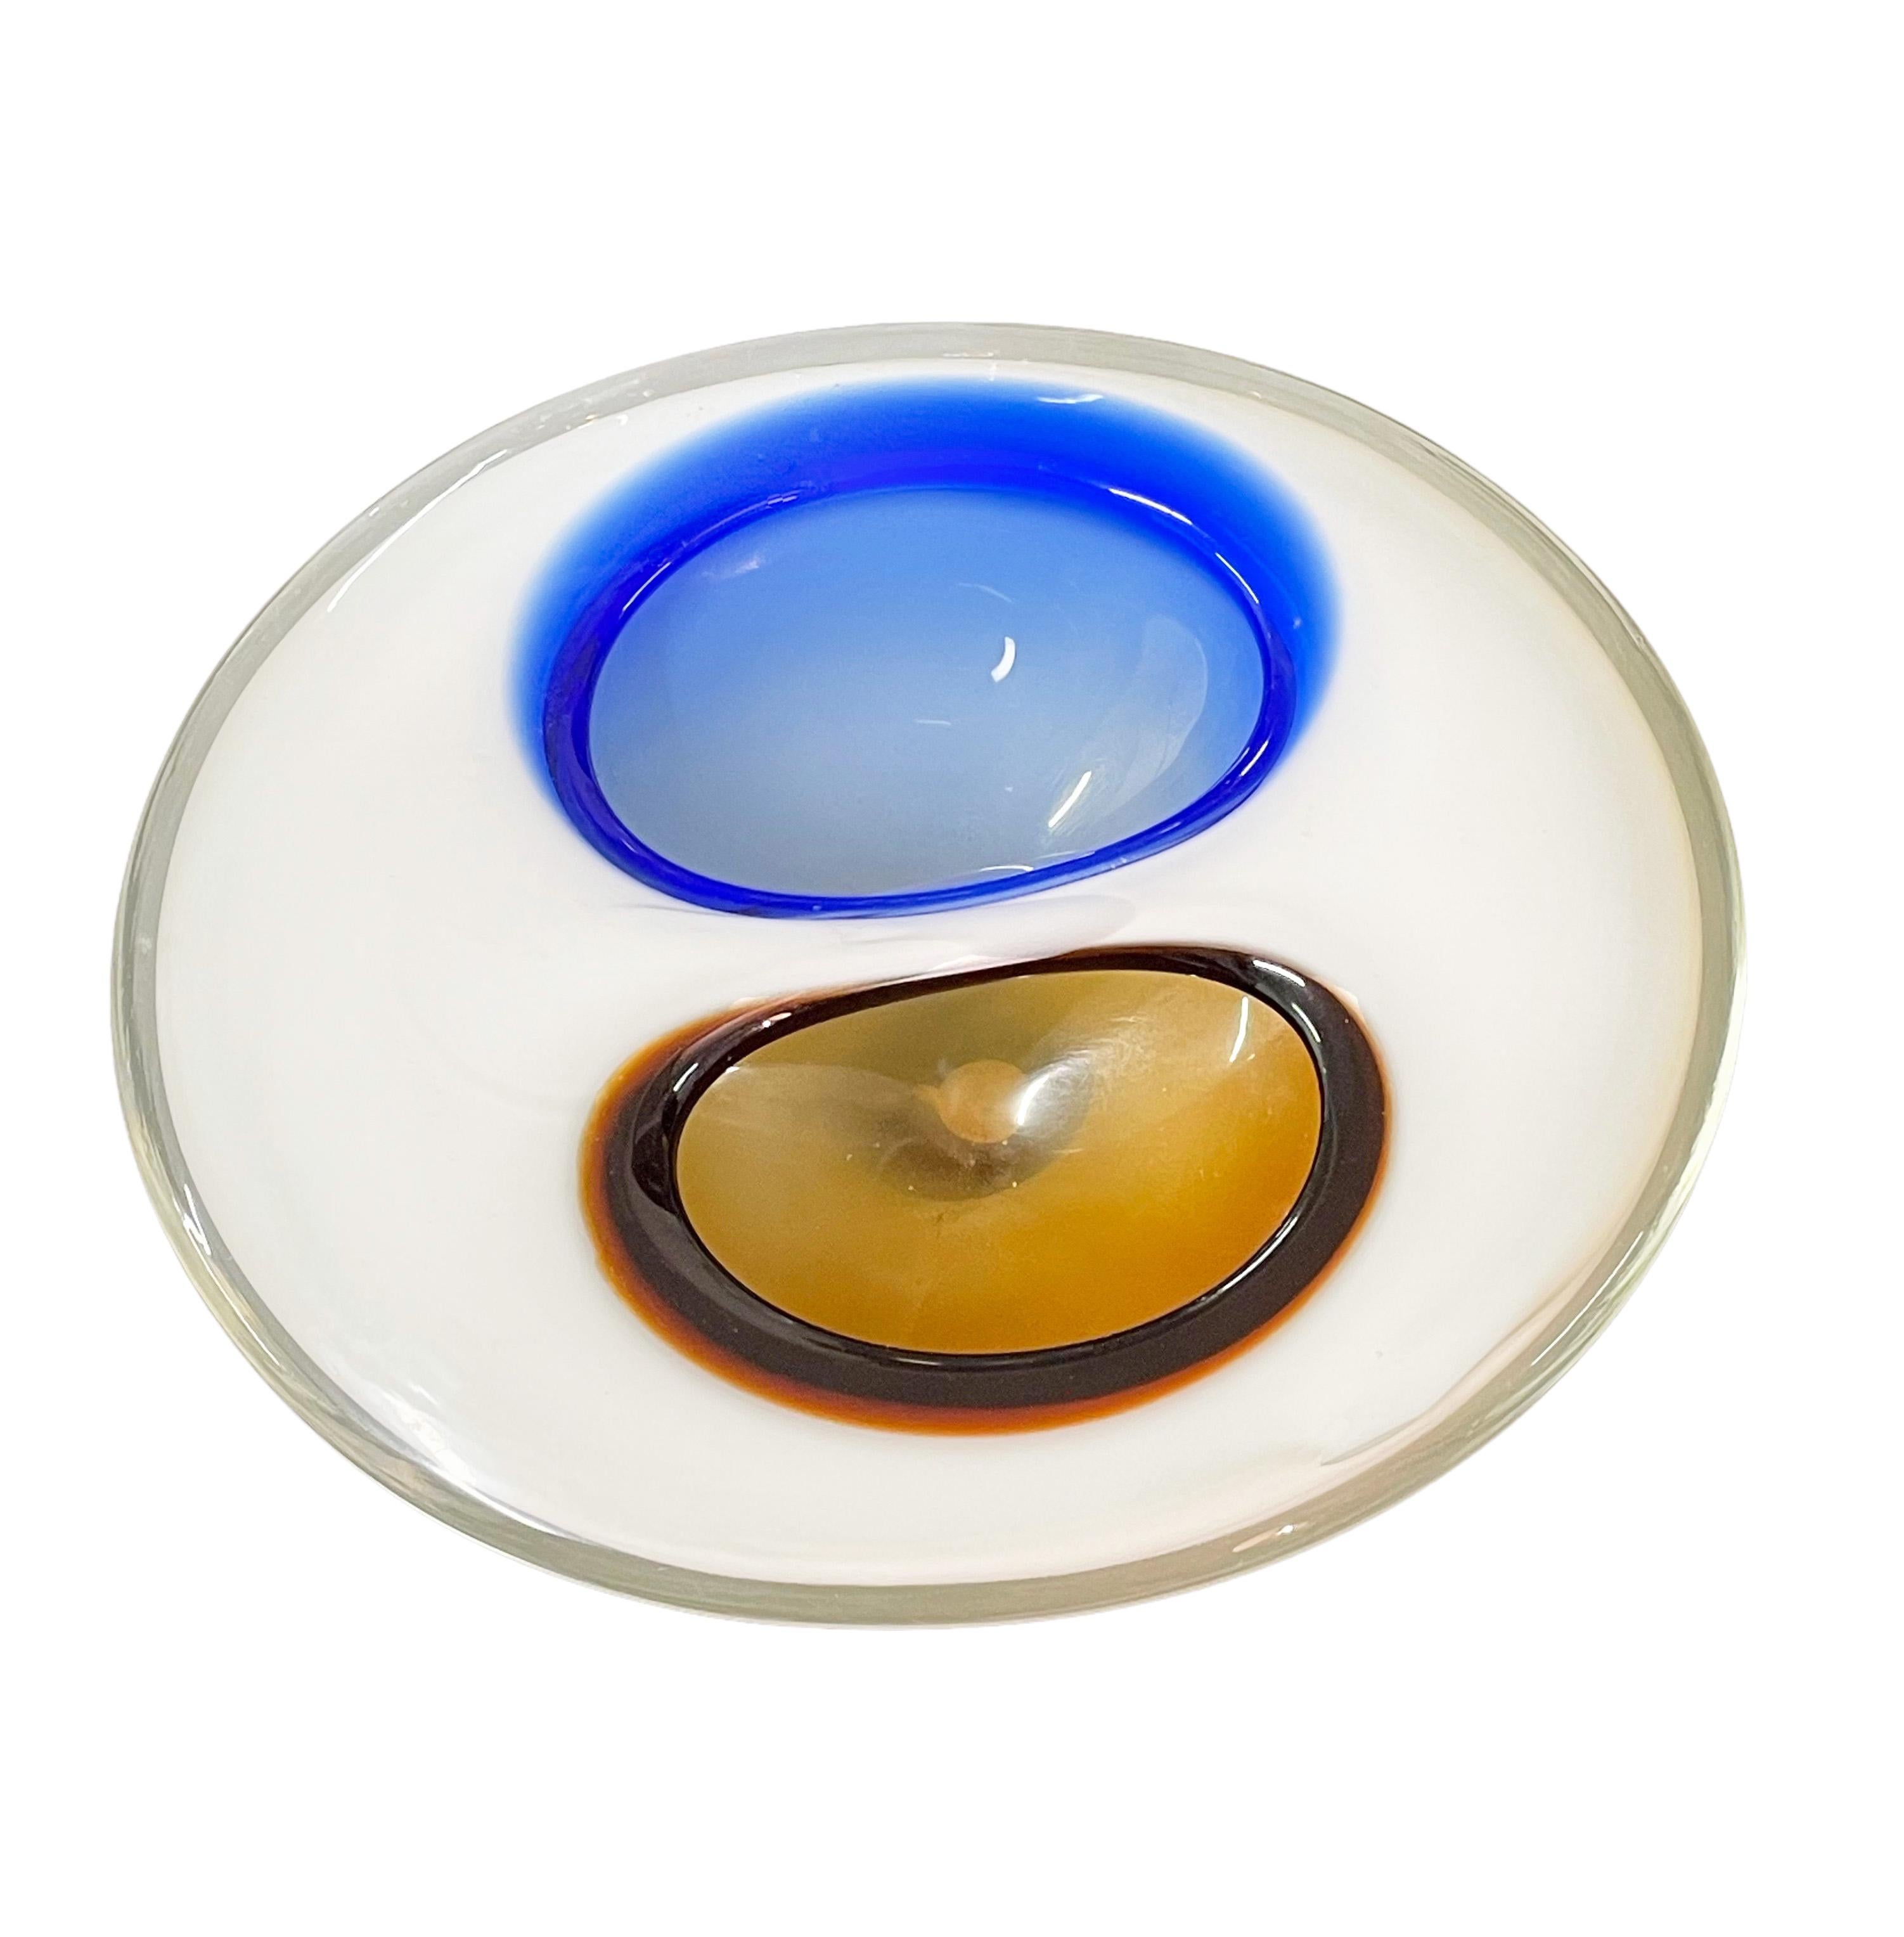 Incredible midcentury Murano art glass white with two pockets in blue and dark amber. This fantastic piece was designed in Italy during the 1970s and it is attributed to Flavio Poli.

The lines are absolutely breath-taking, round and sinuous with